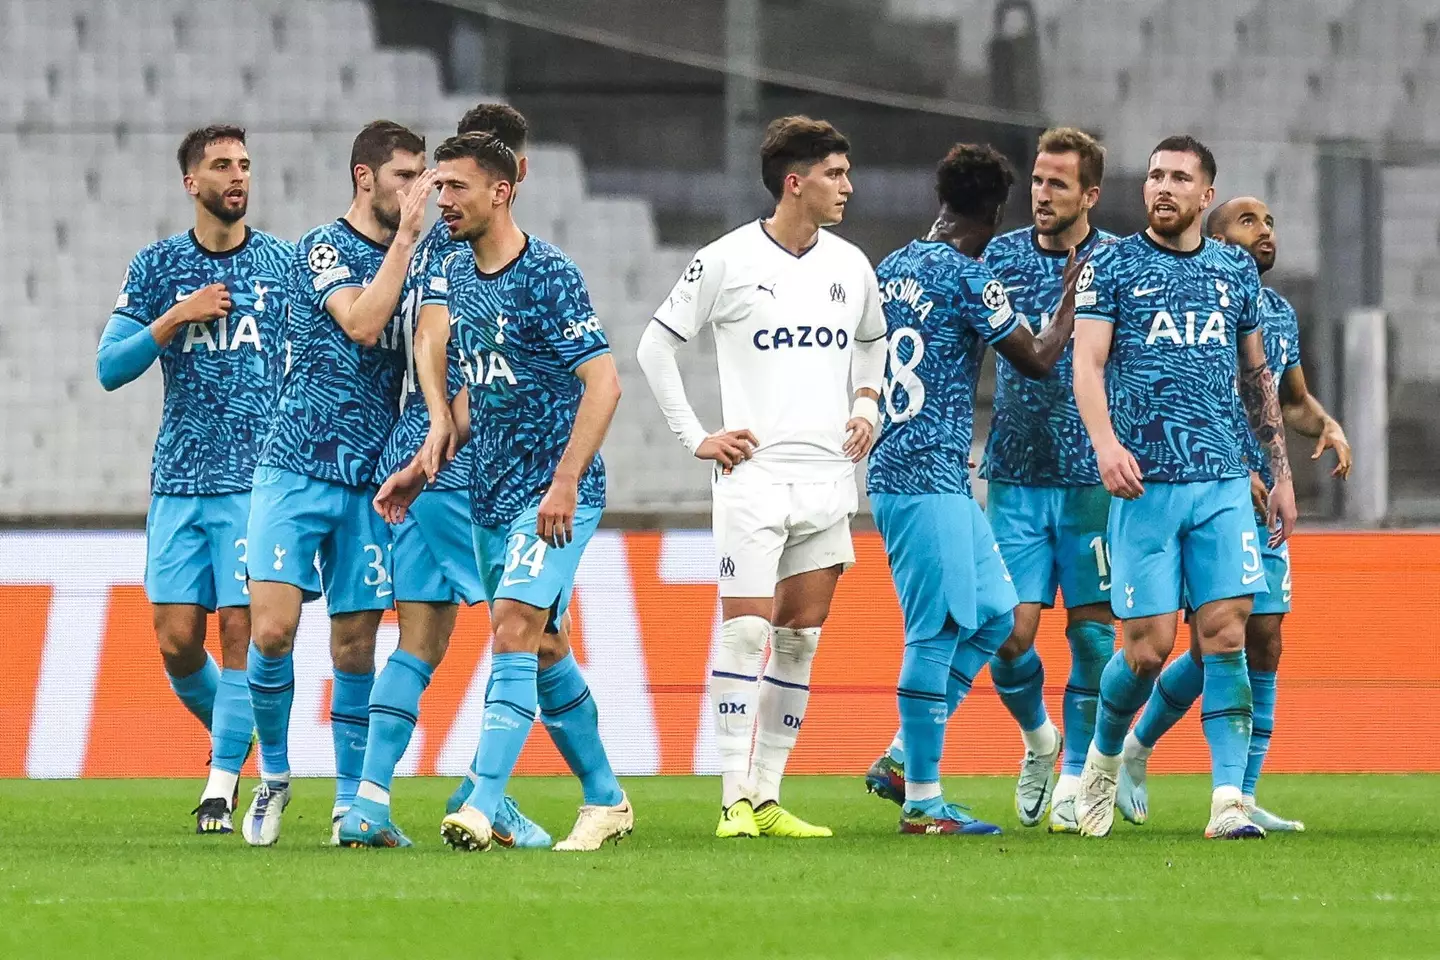 Spurs sealed qualification with victory over Marseille on Tuesday. (Image